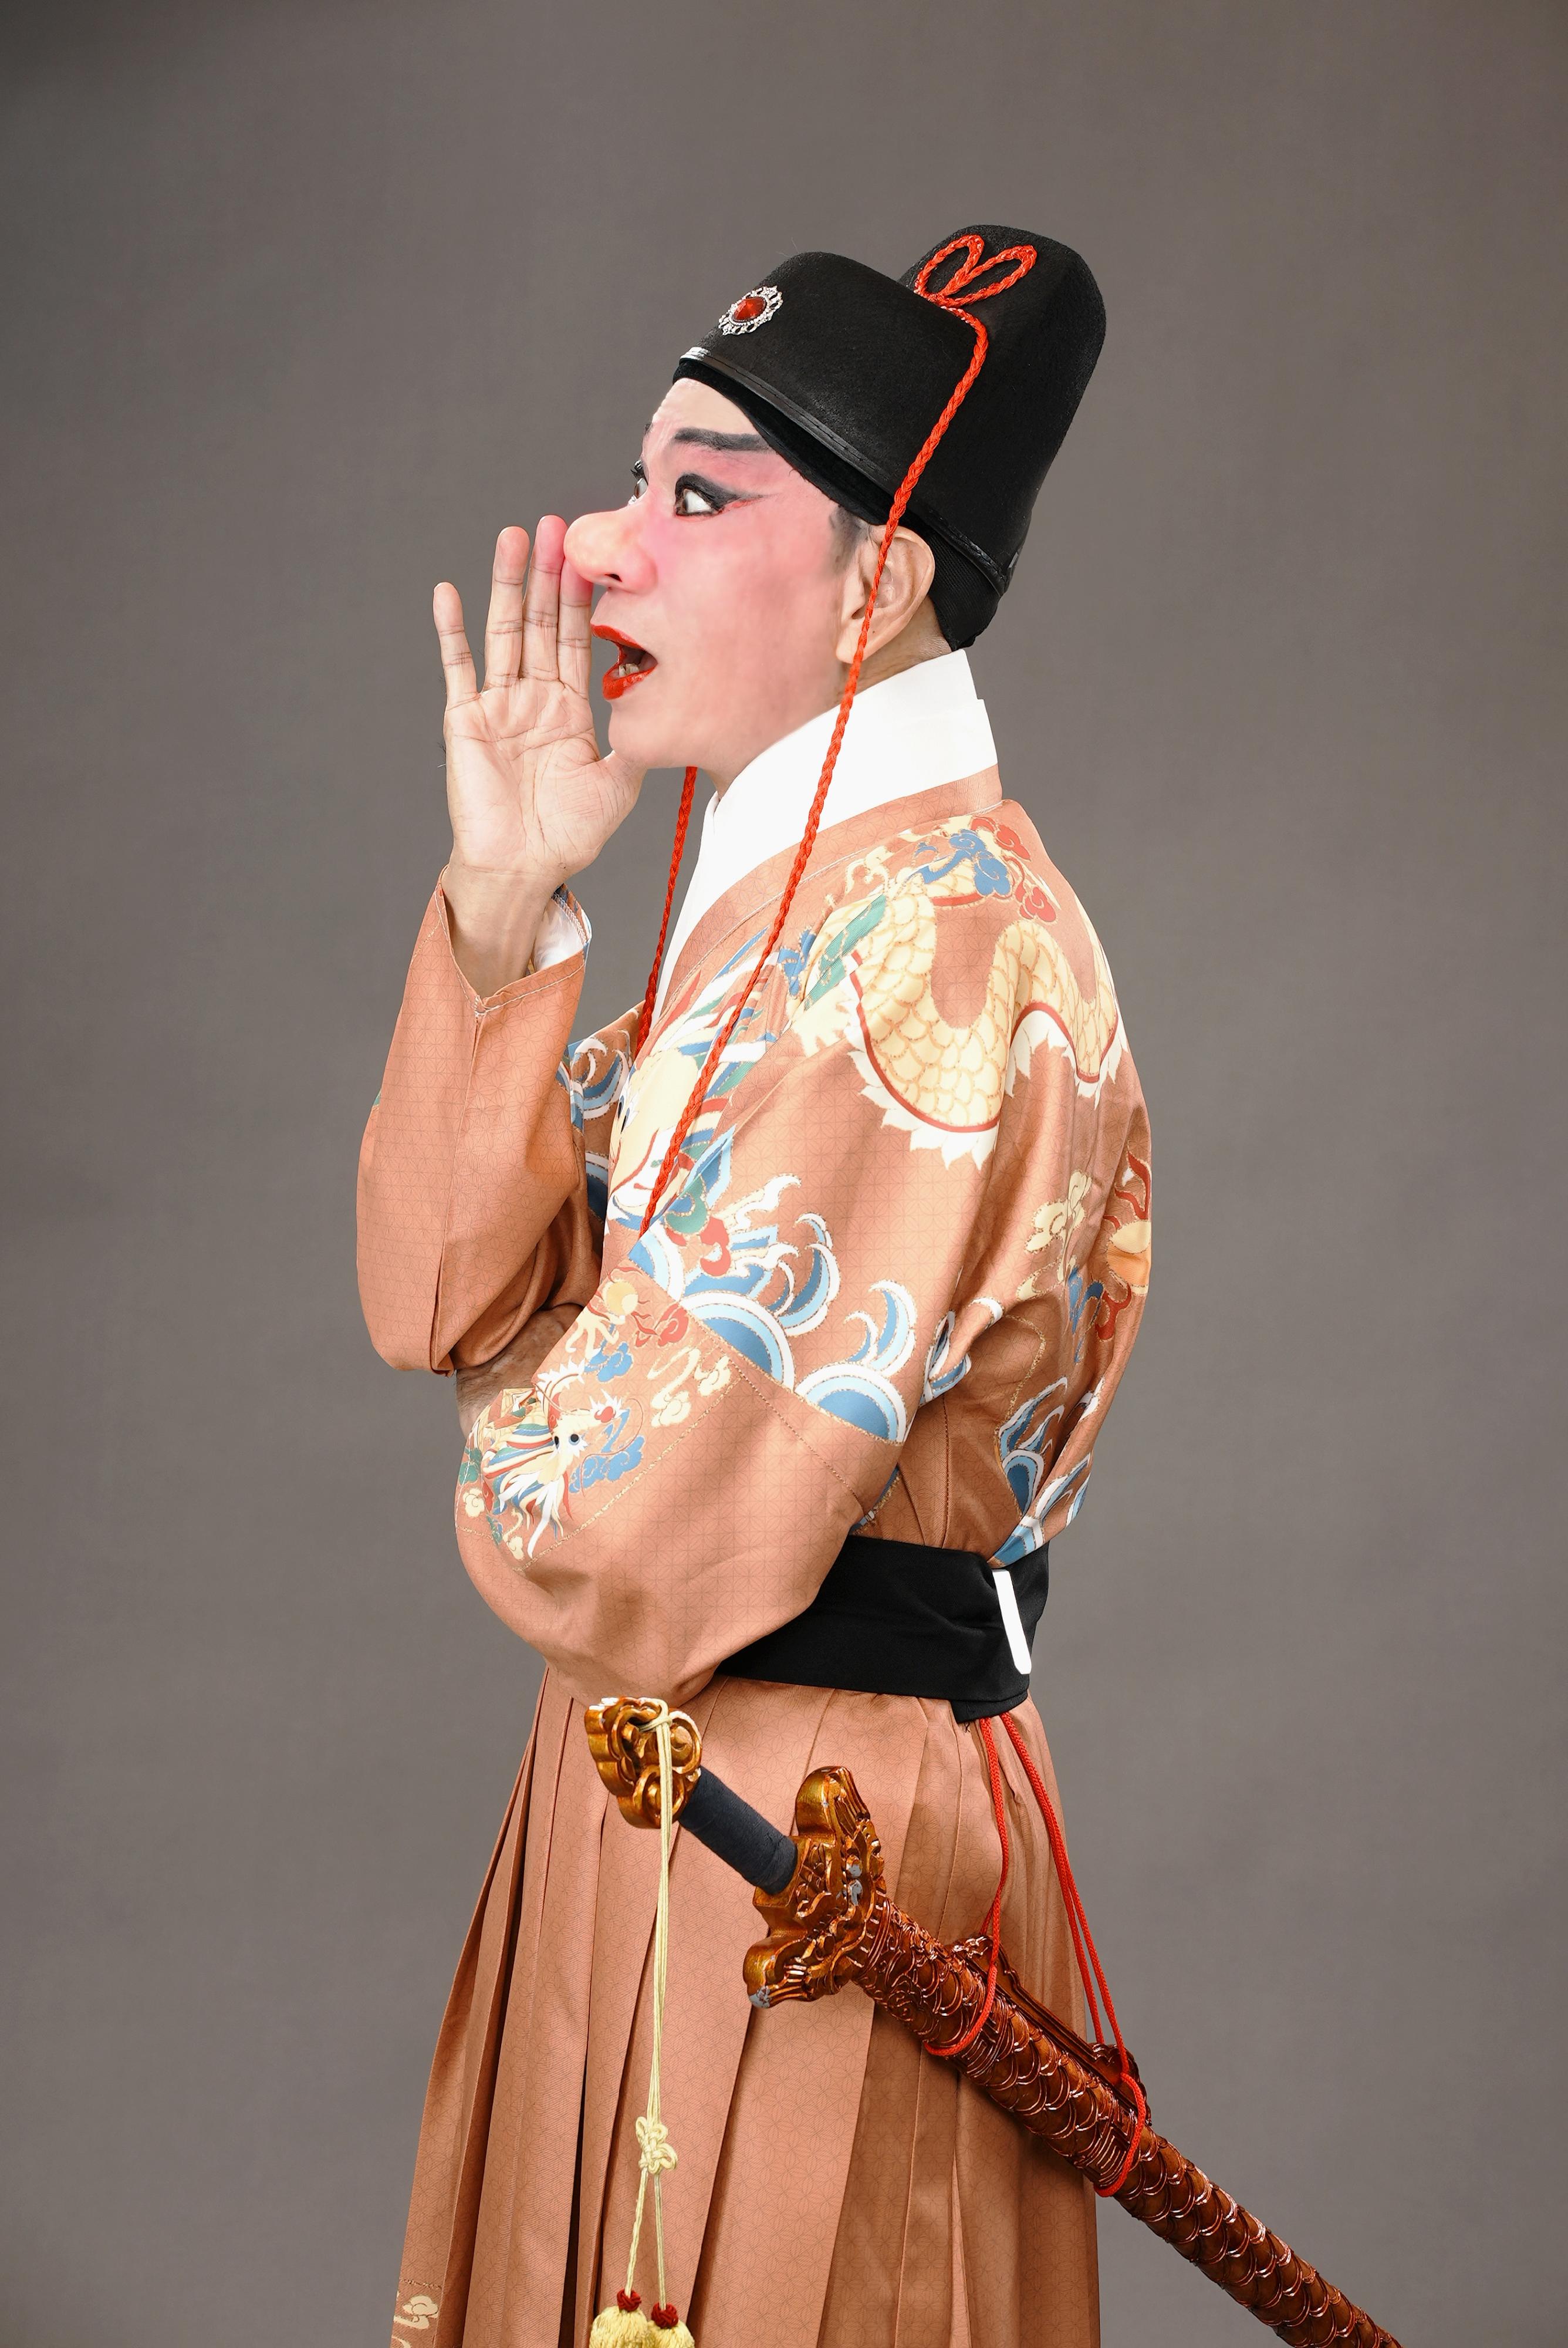 The inaugural Chinese Culture Festival will stage three performances of "Cyrano de Bergerac" - A Cantonese Opera Interpretation in mid-June. Photo shows famous Cantonese opera artist Law Ka-ying.